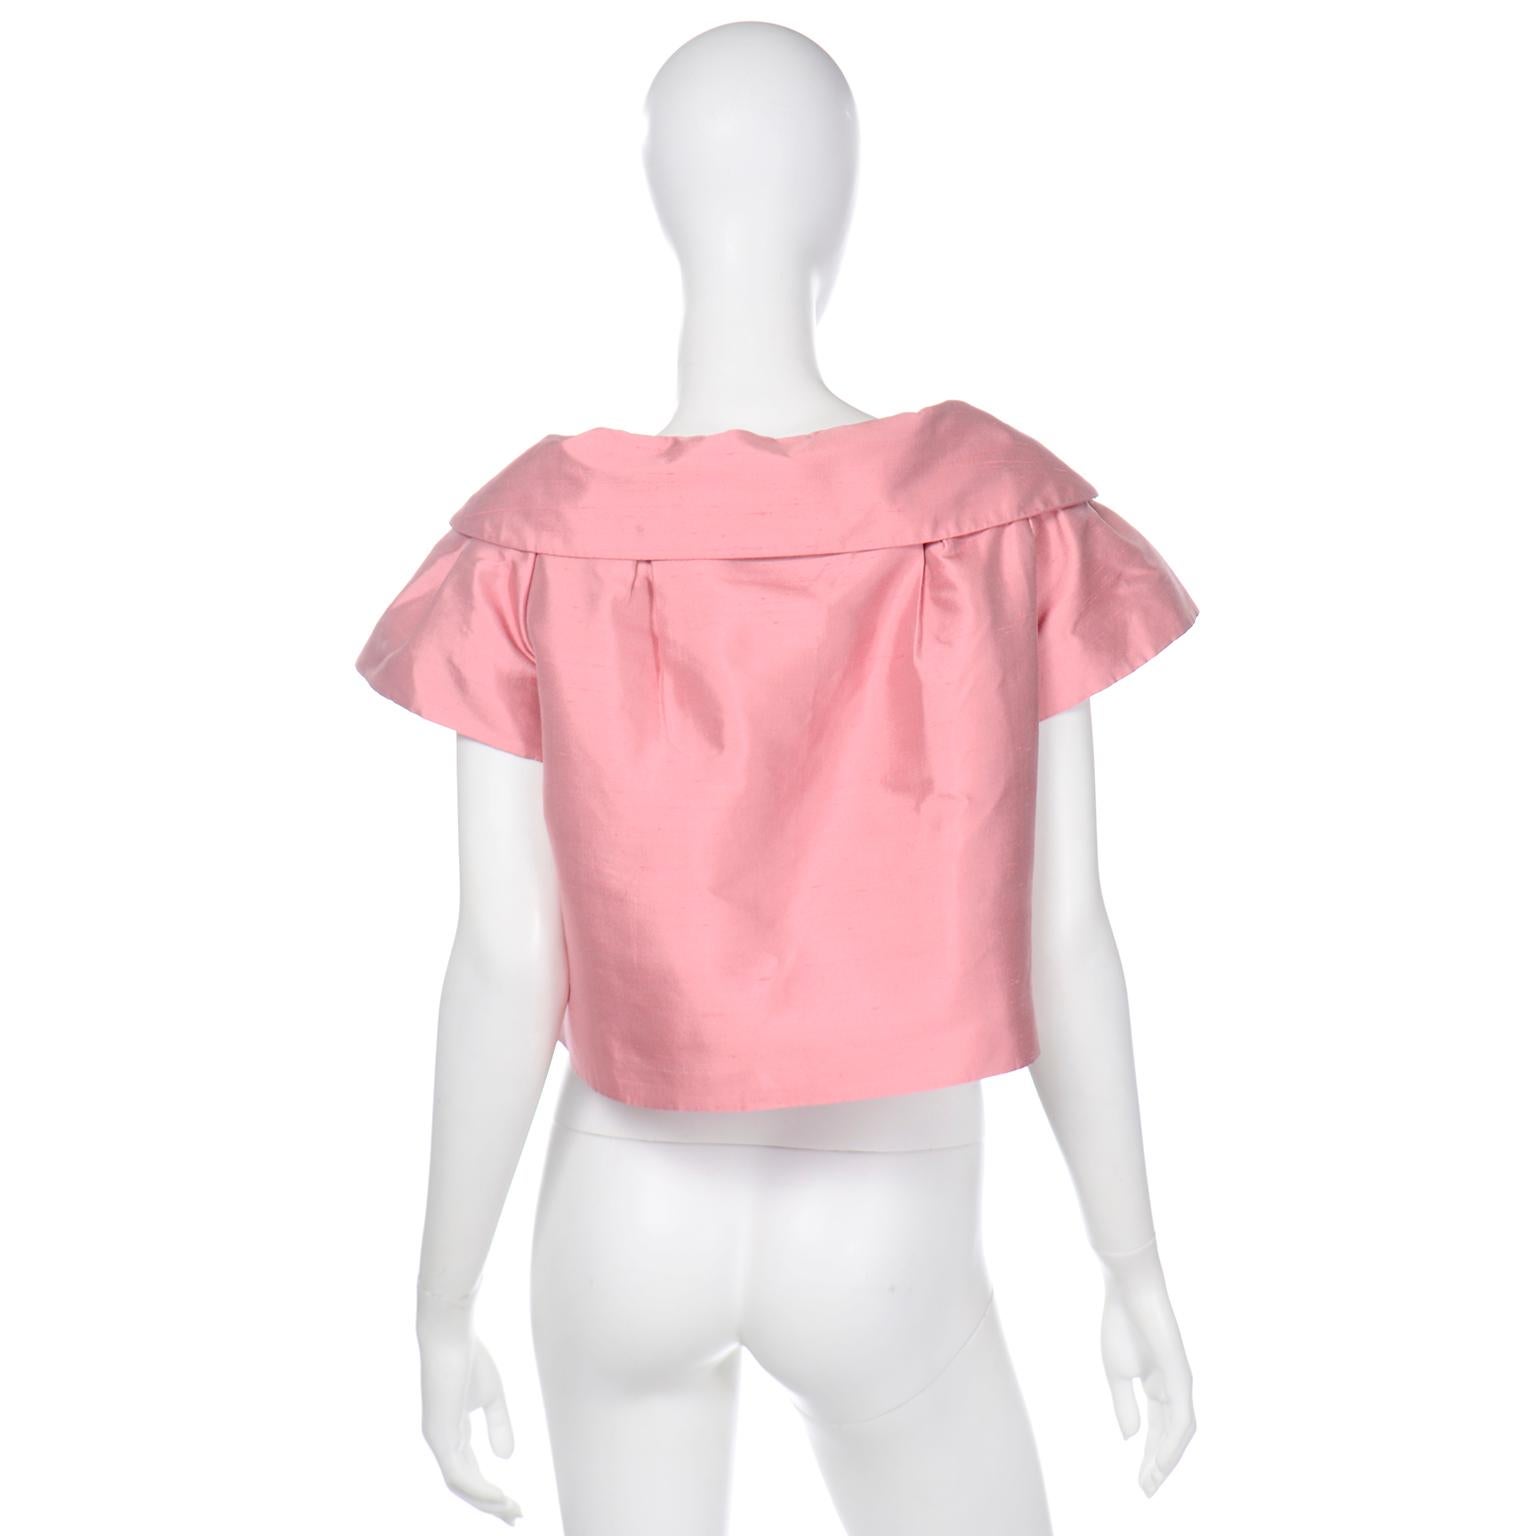 John Galliano for Christian Dior 1960s Inspired Pink 2008 Vintage Jacket Top 2